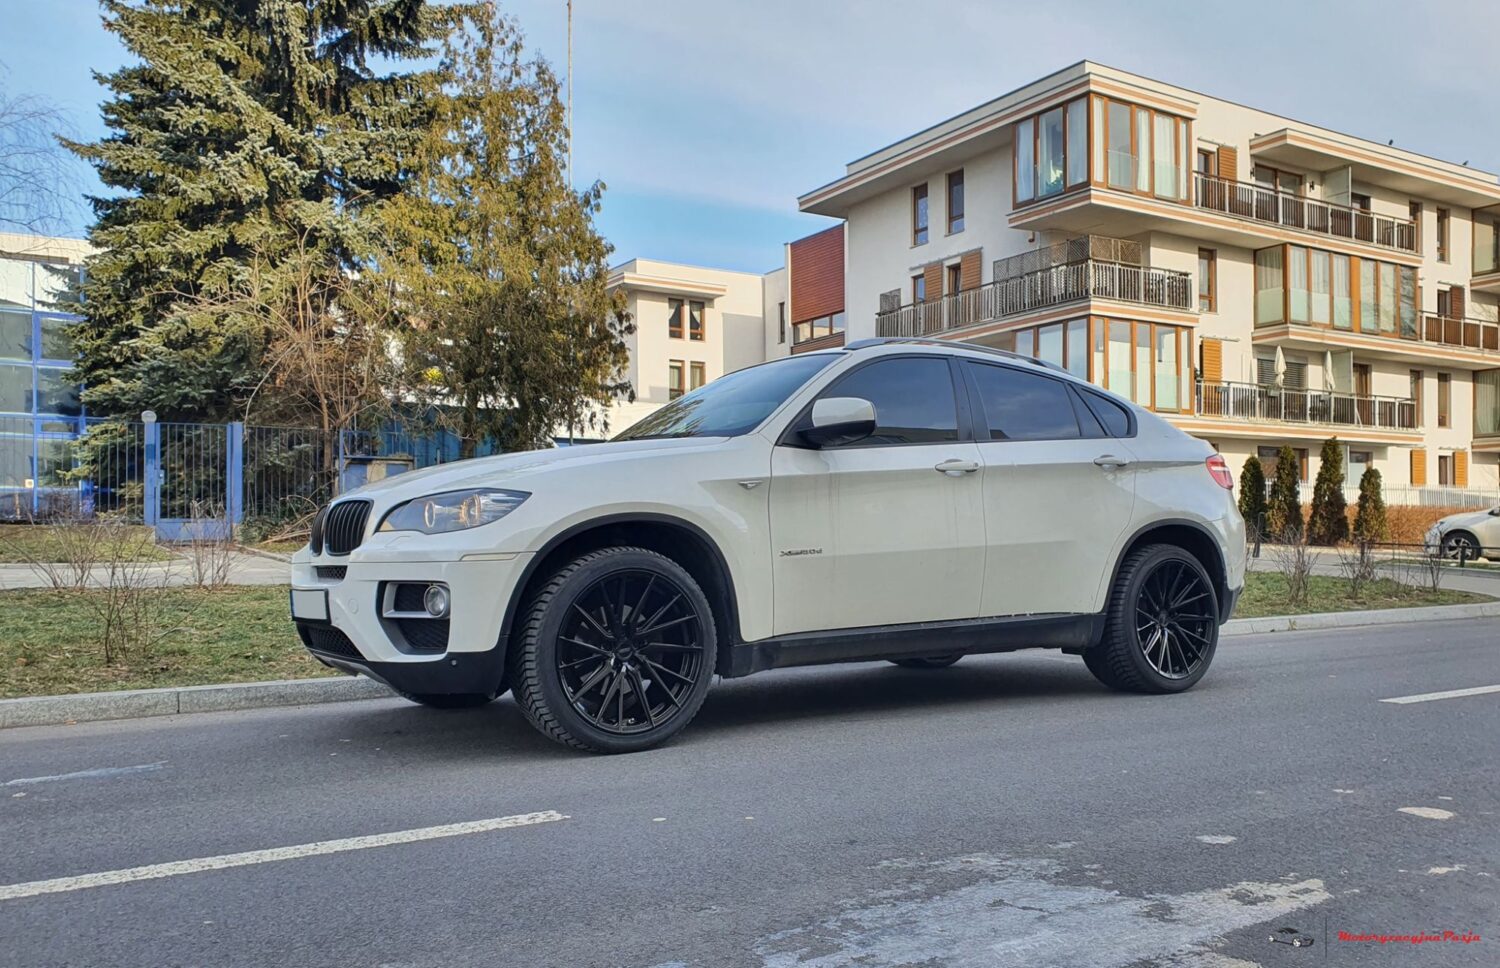 BMW X6 E71 with 21×10.5 and 21×12-inch Vossen HF-4T
